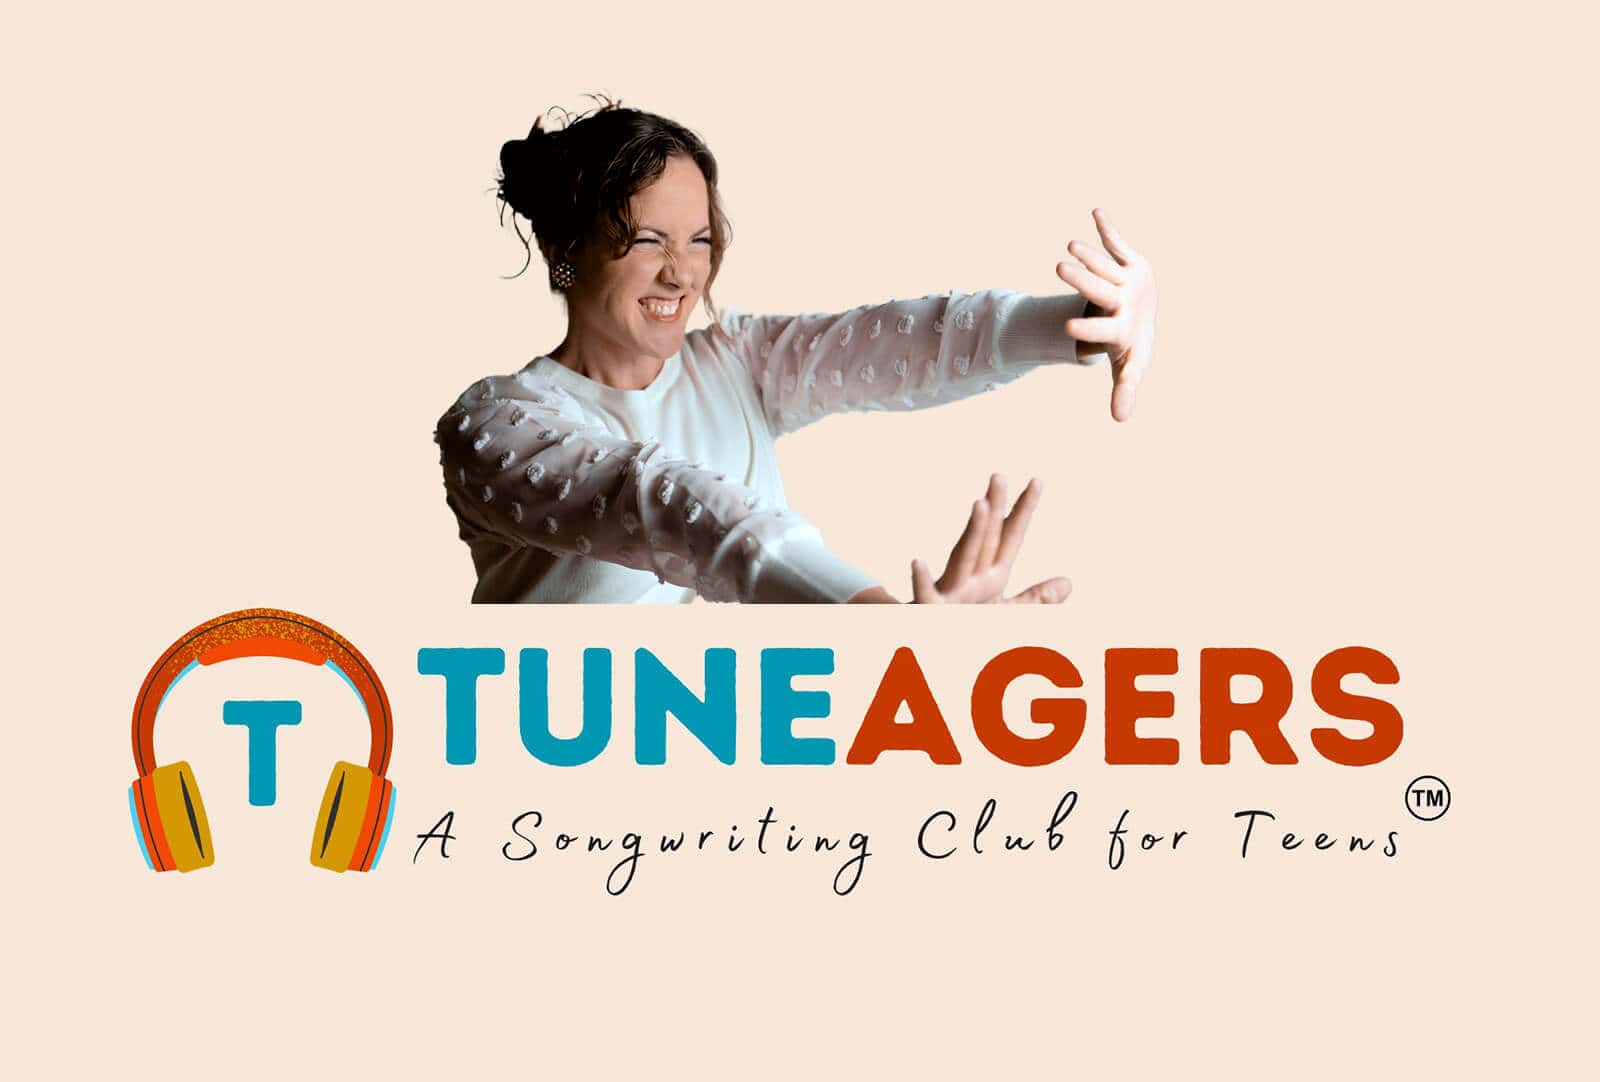 Discover Tuneagers: A Songwriting Club for Teens